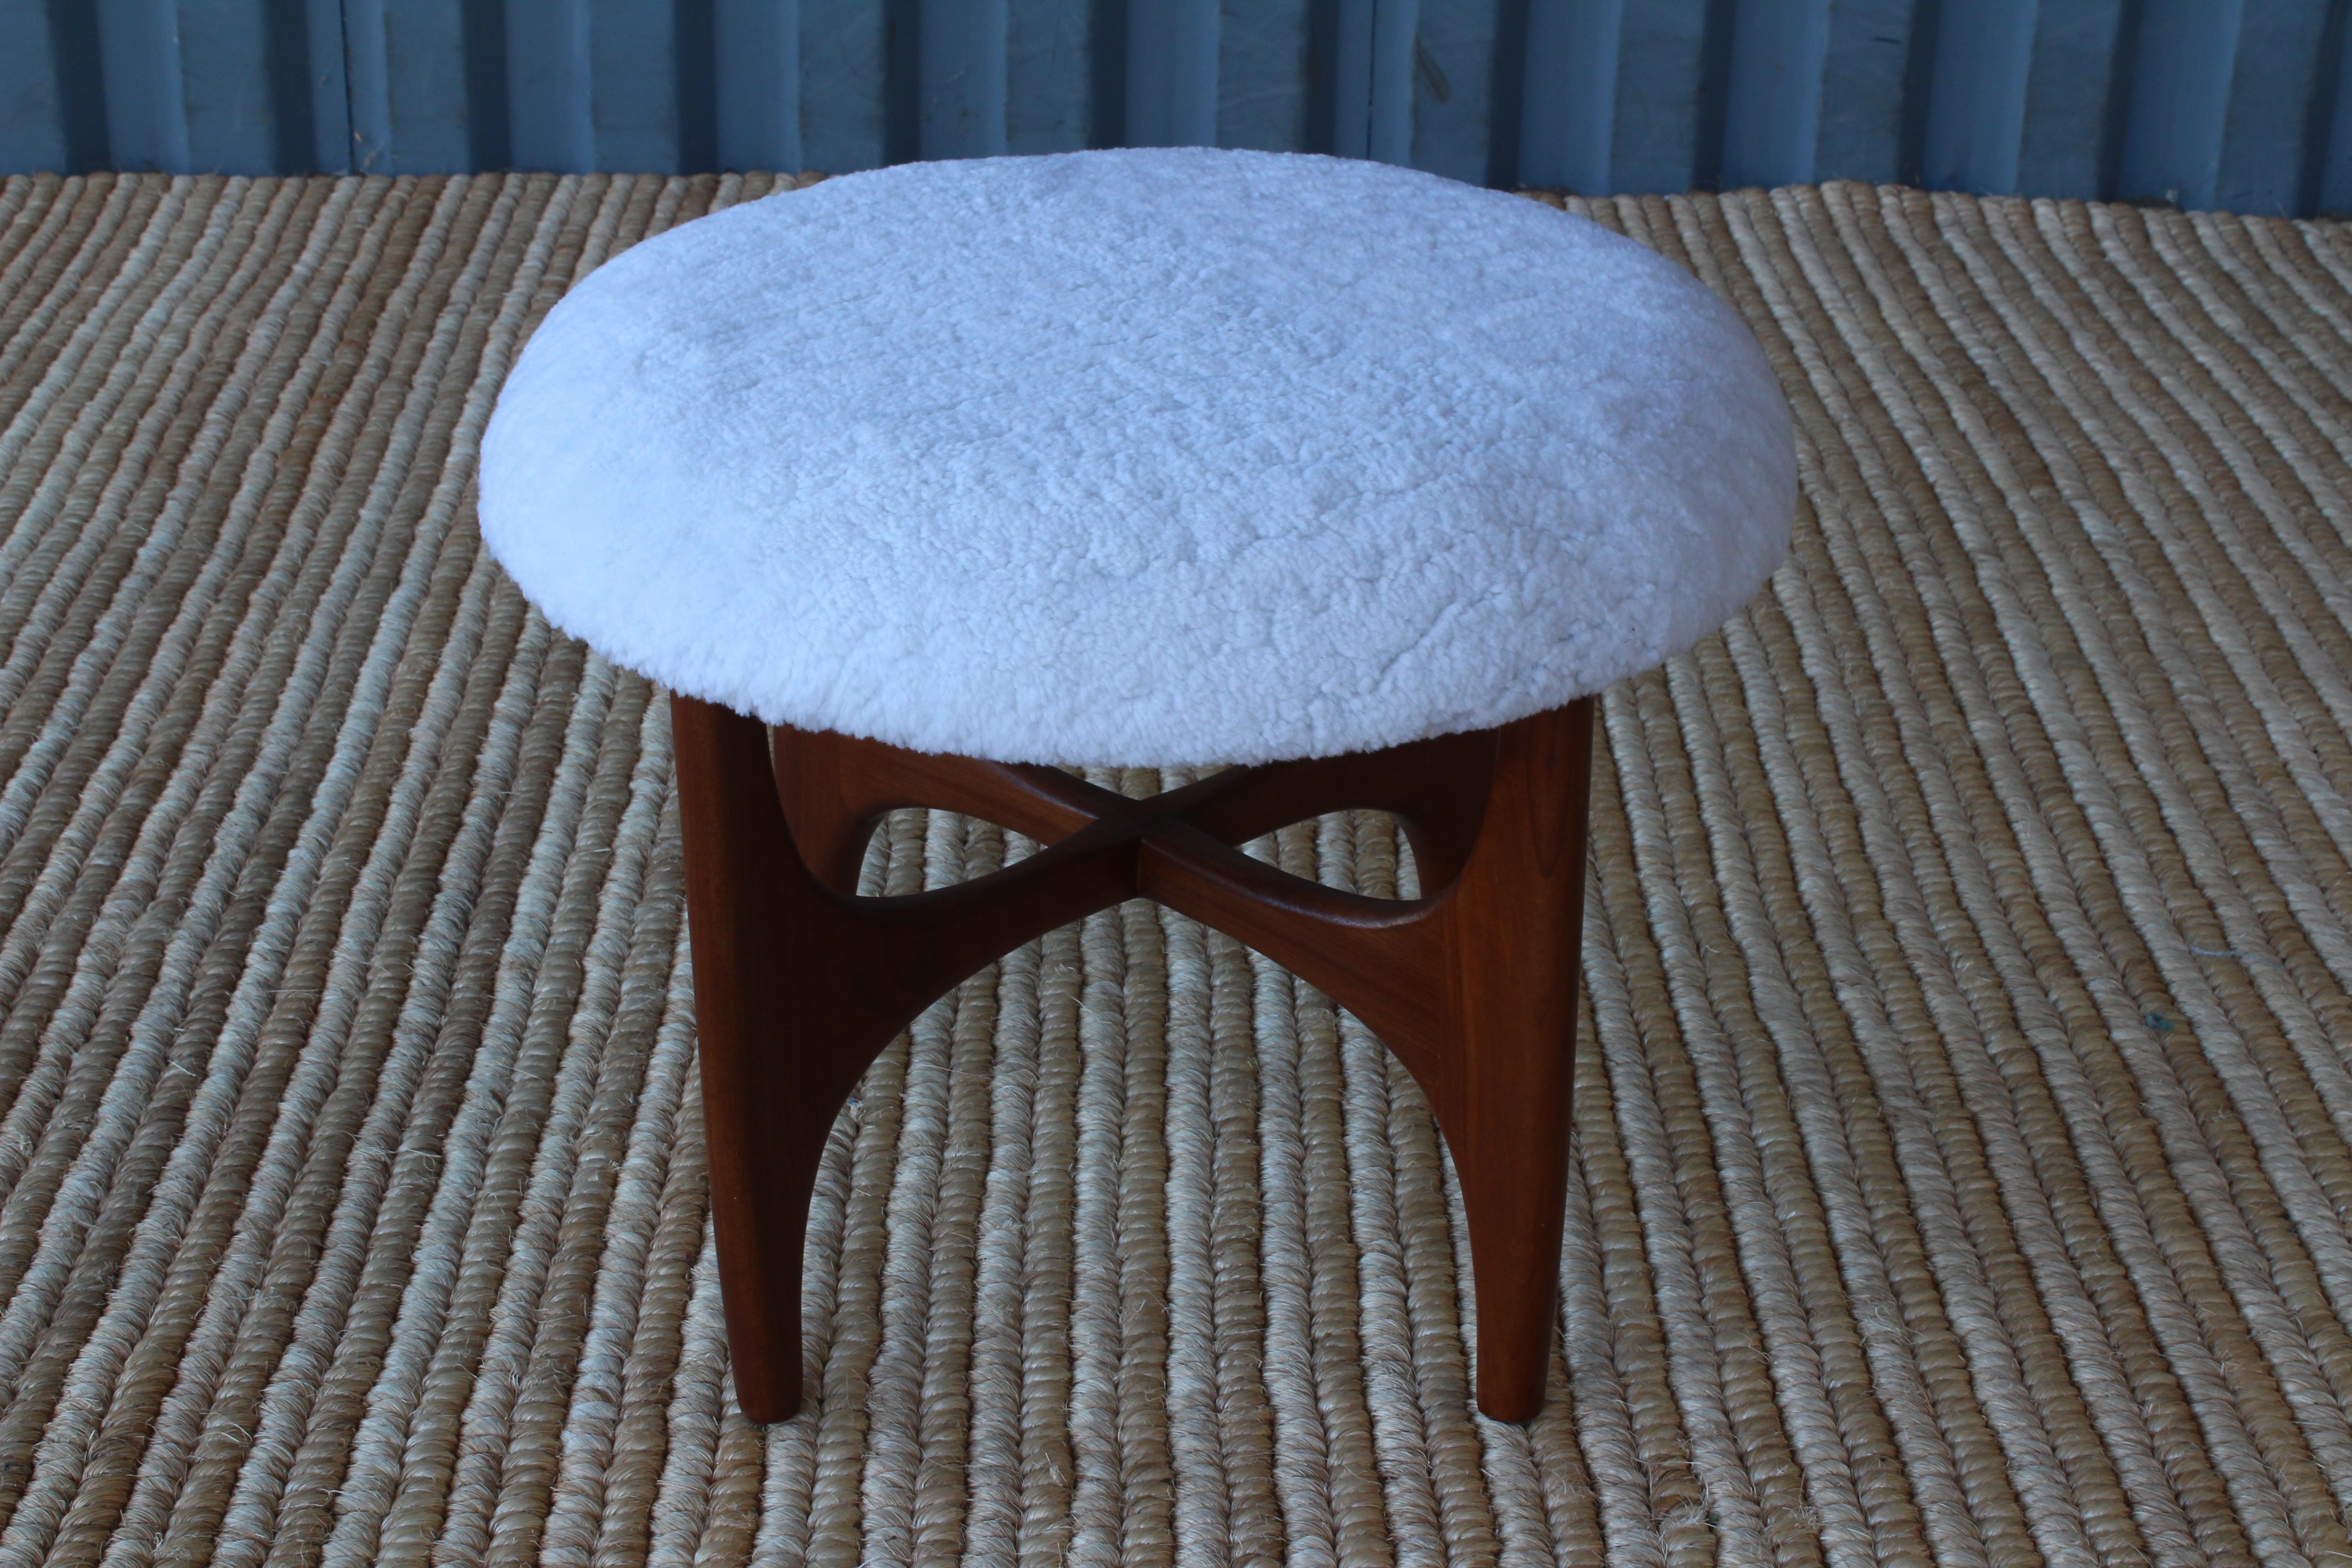 Footstool by G-Plan, England, 1950s. Recently refinished teak base and new white shearling upholstery.